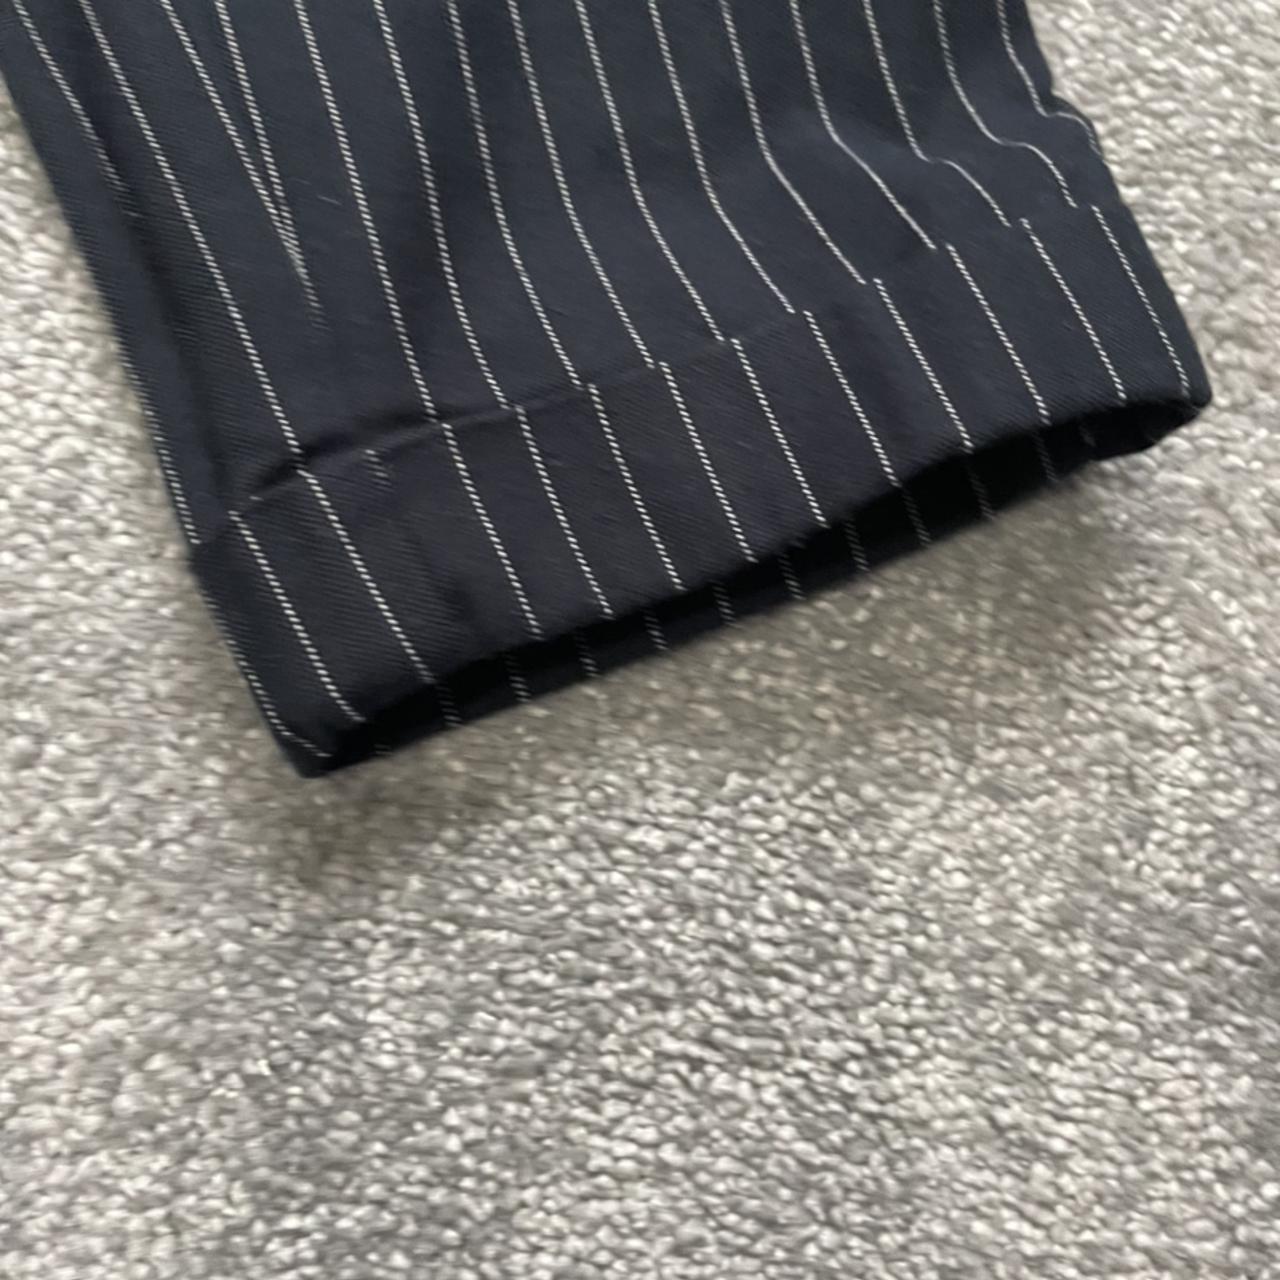 PINSTRIPE TROUSERS - NAVY AND WHITE WITH ZIP FRONT... - Depop